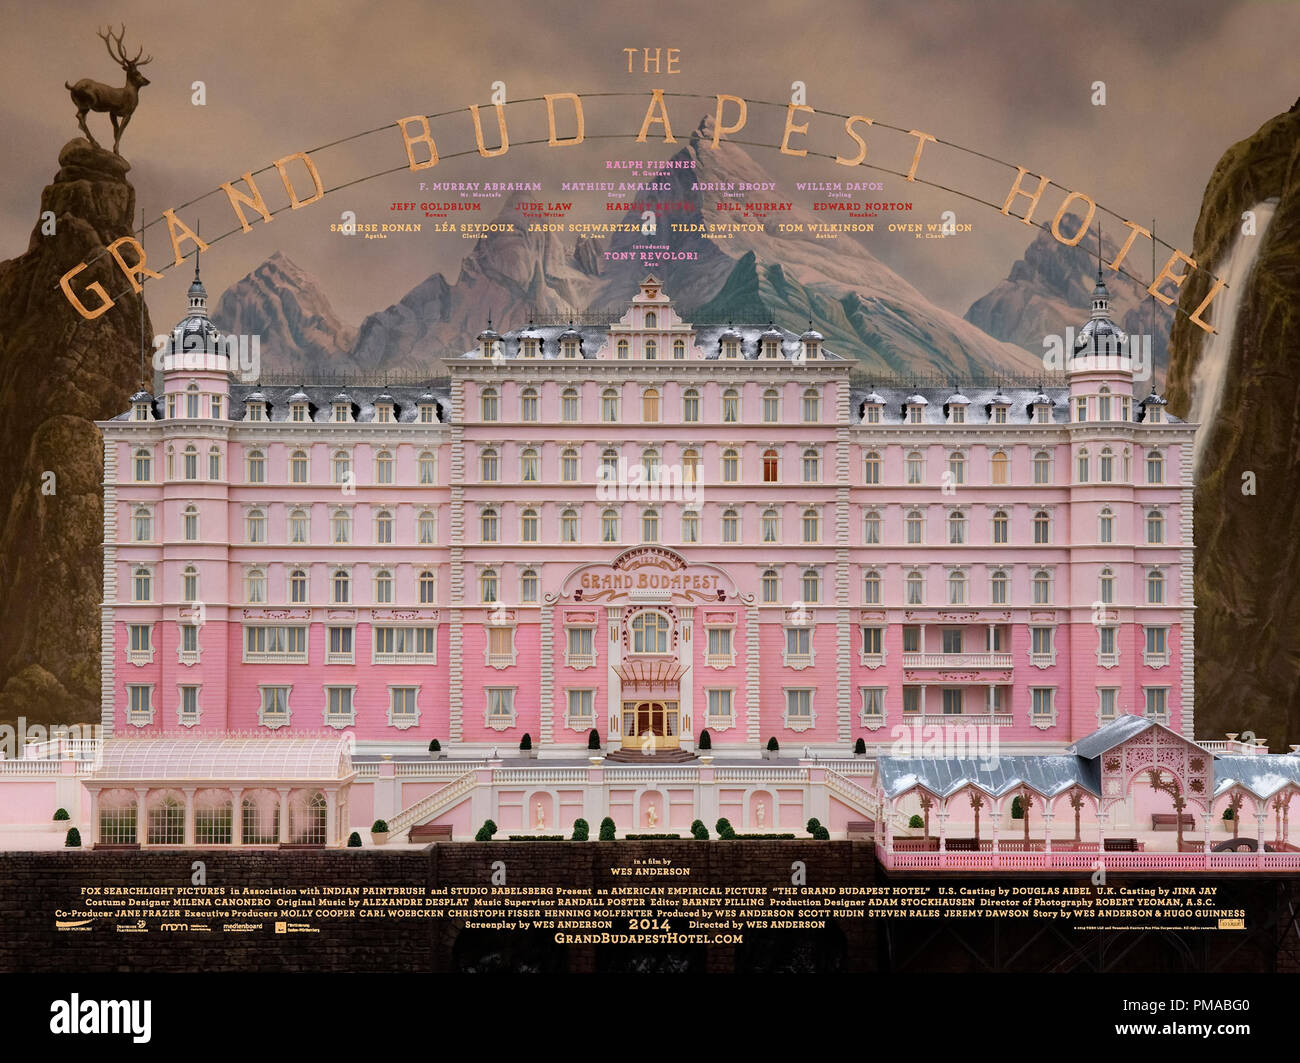 Salme underholdning Meget sur The Grand Budapest Hotel" (2014) Poster Stock Photo - Alamy